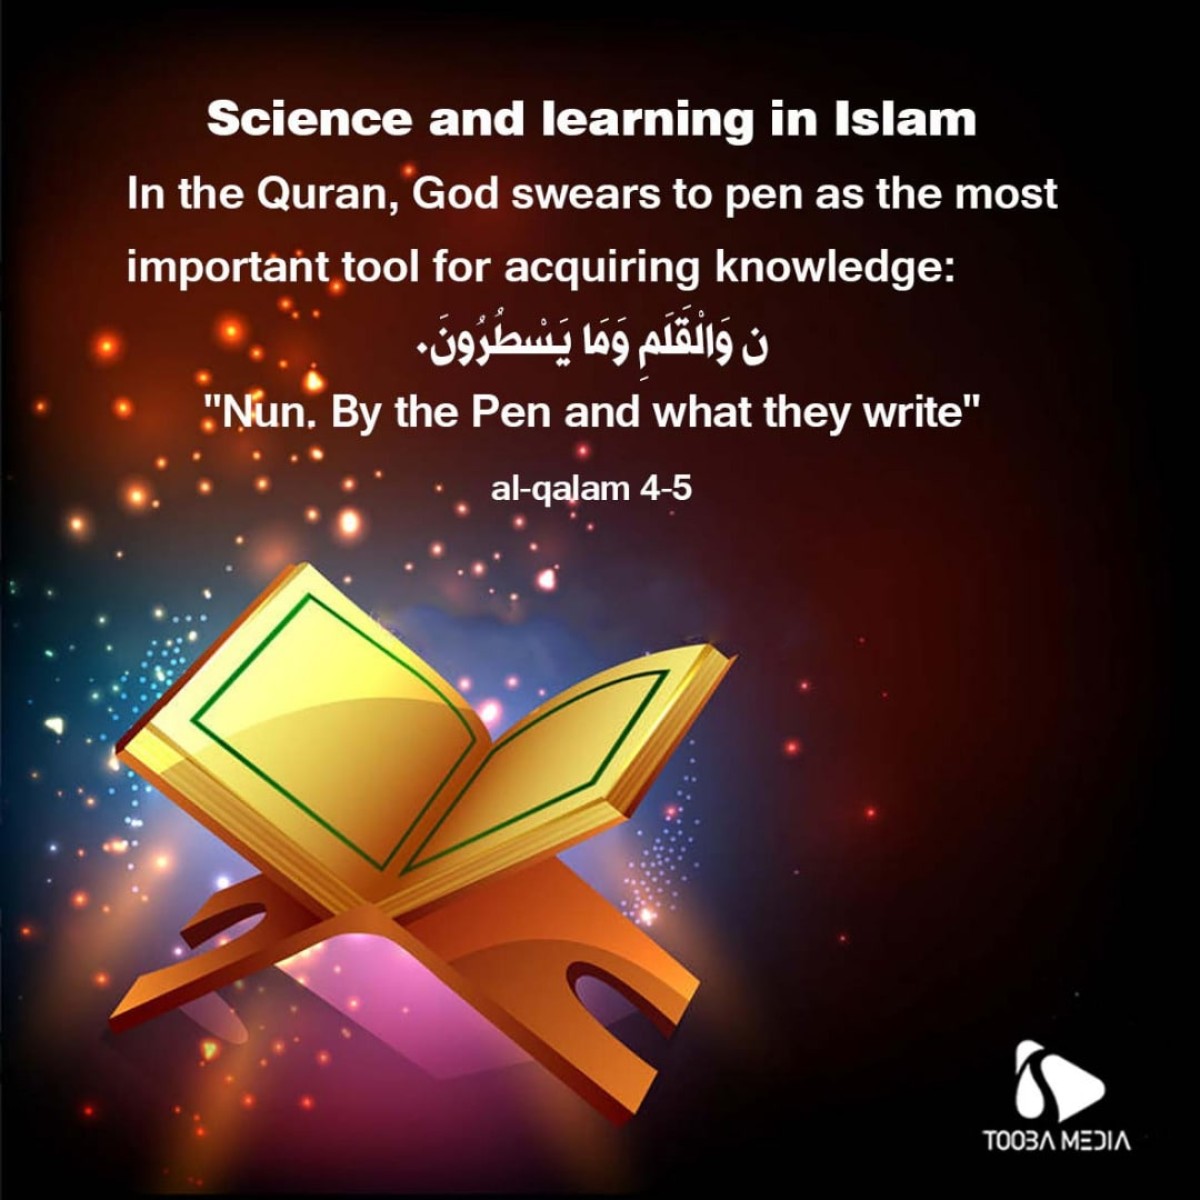 Science and learning in Islam 2